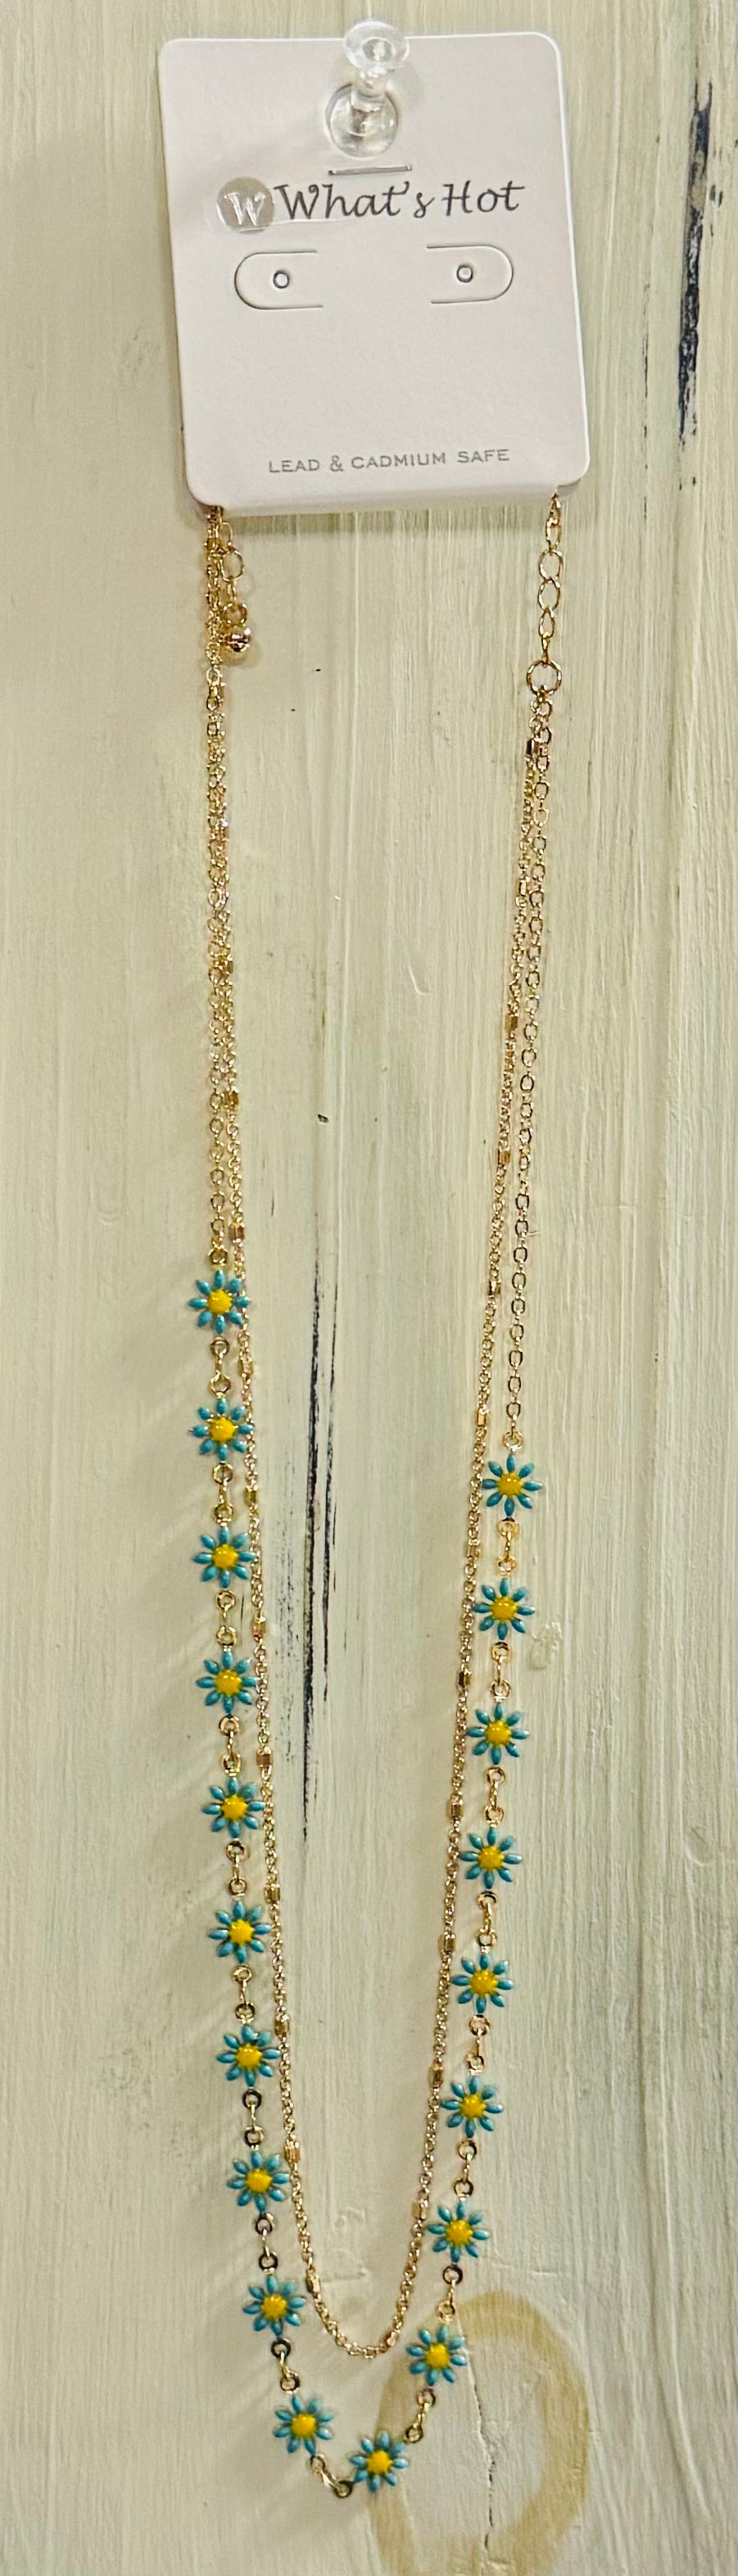 Gold Chain with Teal Flower Chain Layered Necklace